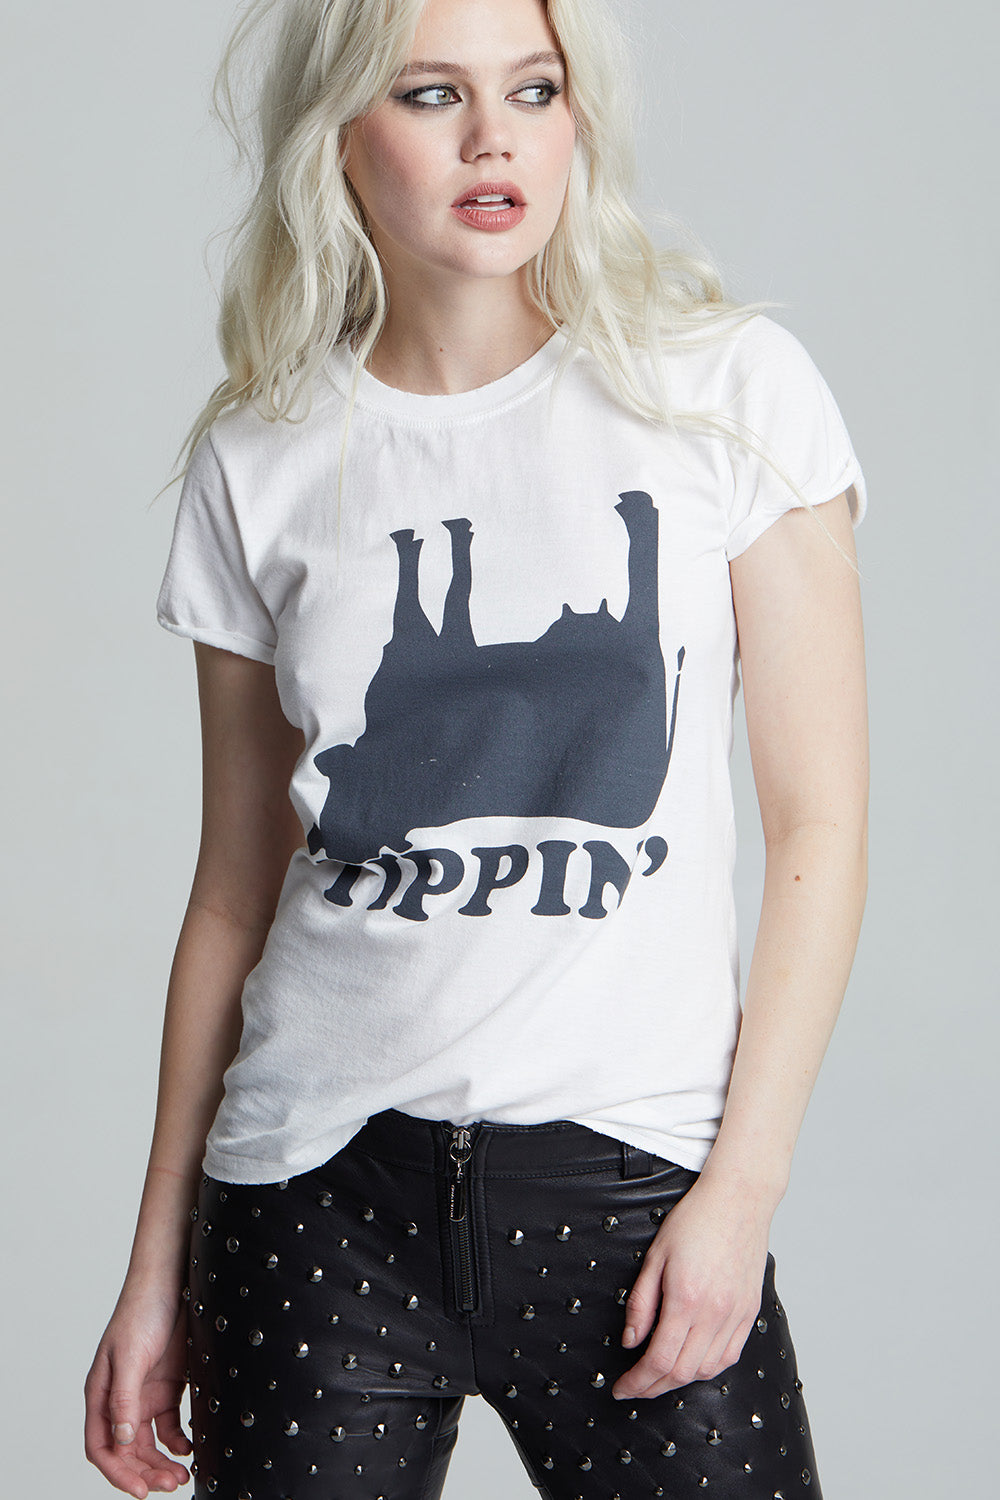 Cow Tippin' Tee